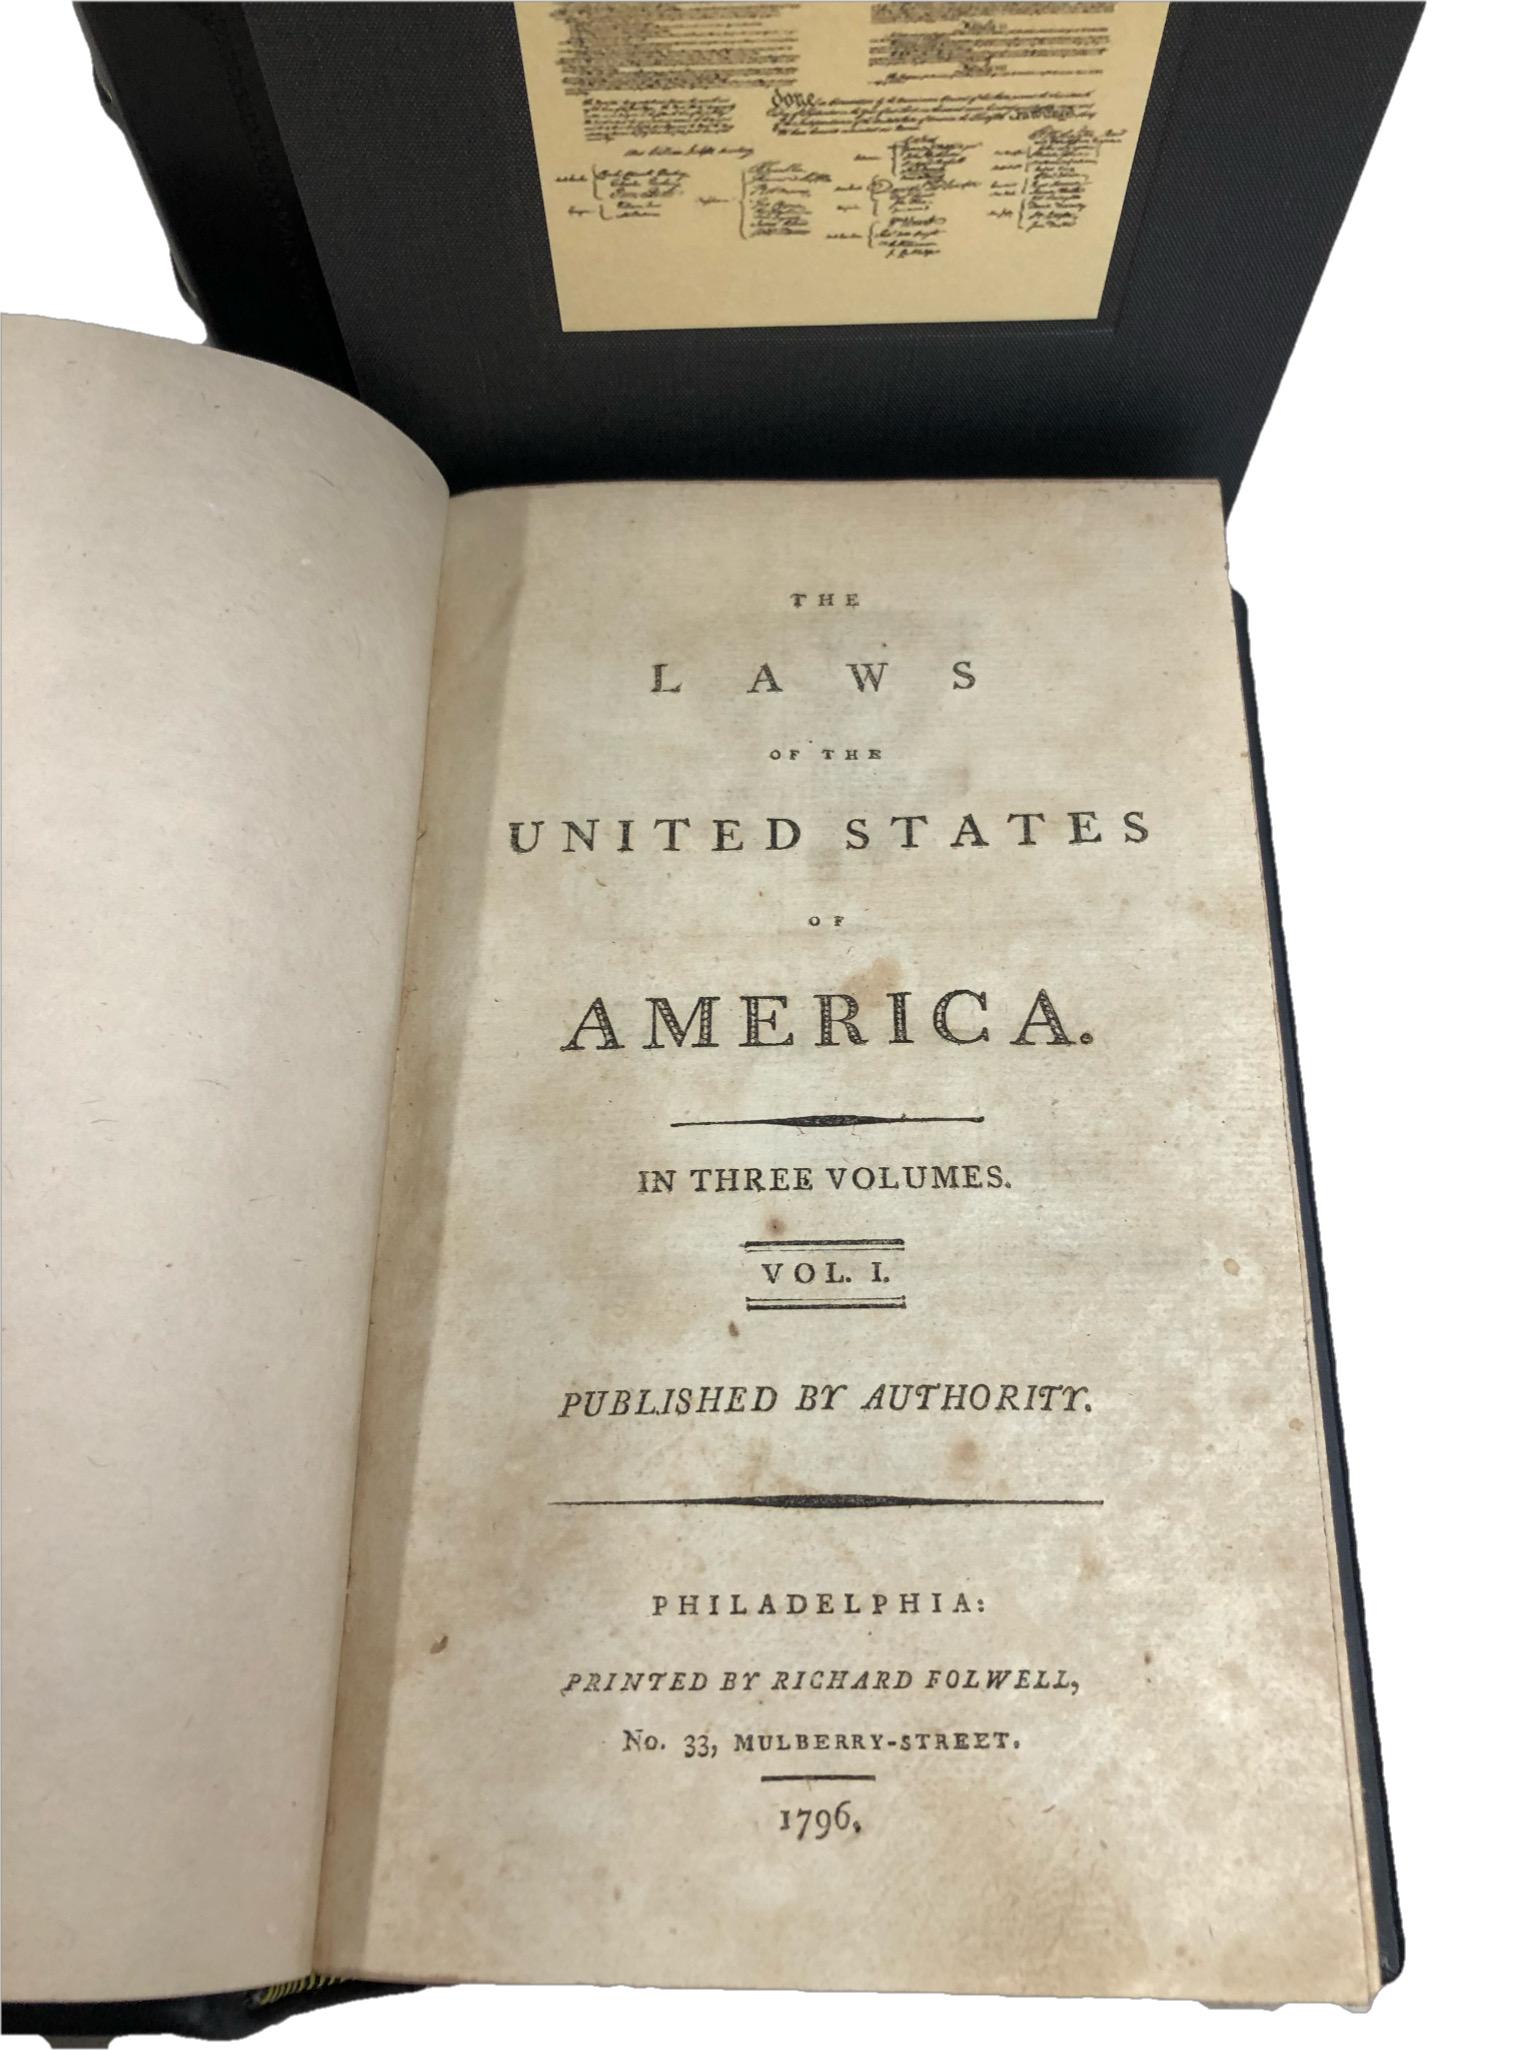 Late 18th Century The Laws of the United States of America, First Edition, 3 Vol. Set, 1796-7